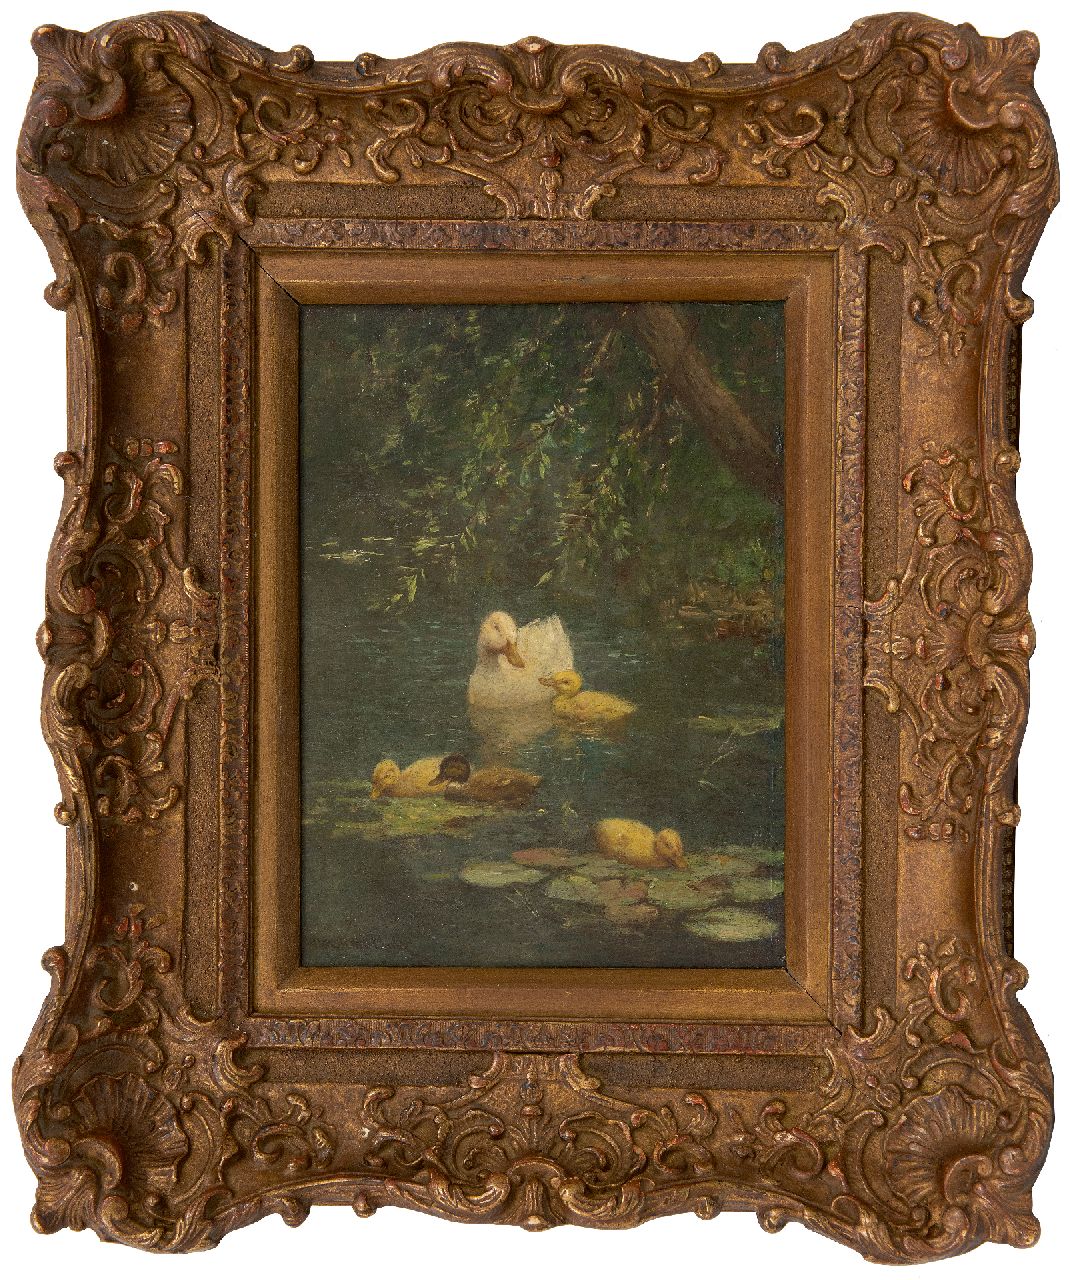 Artz C.D.L.  | 'Constant' David Ludovic Artz | Paintings offered for sale | Duck and ducklings in a forest pond, oil on panel 23.8 x 17.8 cm, signed l.l.